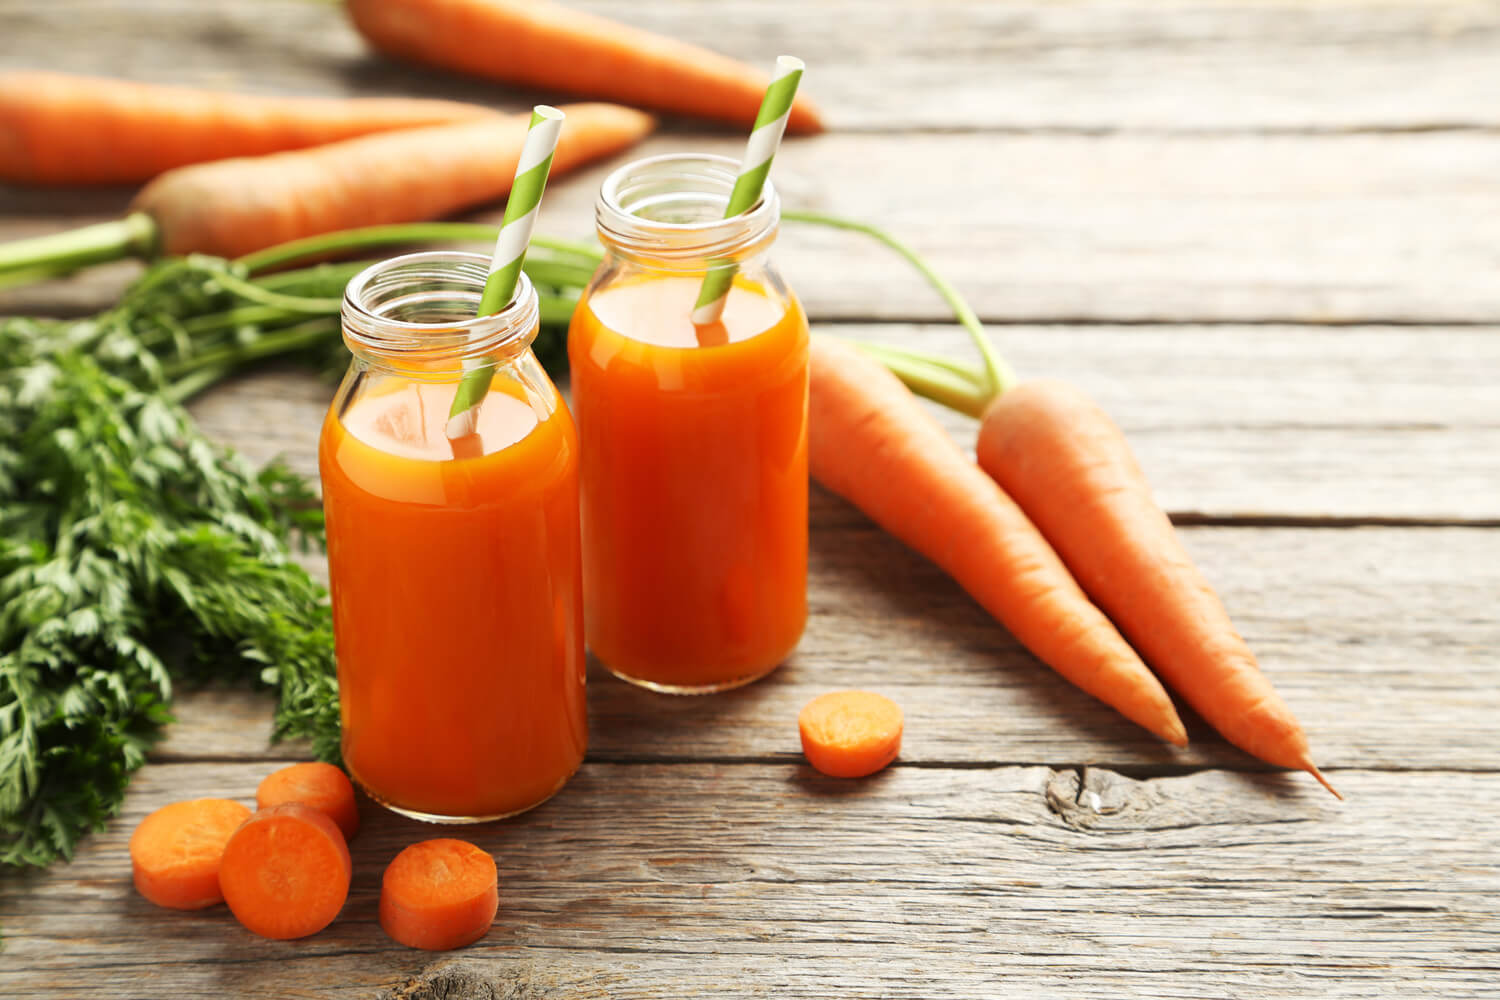 Tips and Tricks to Extract More Nutrients From Carrots